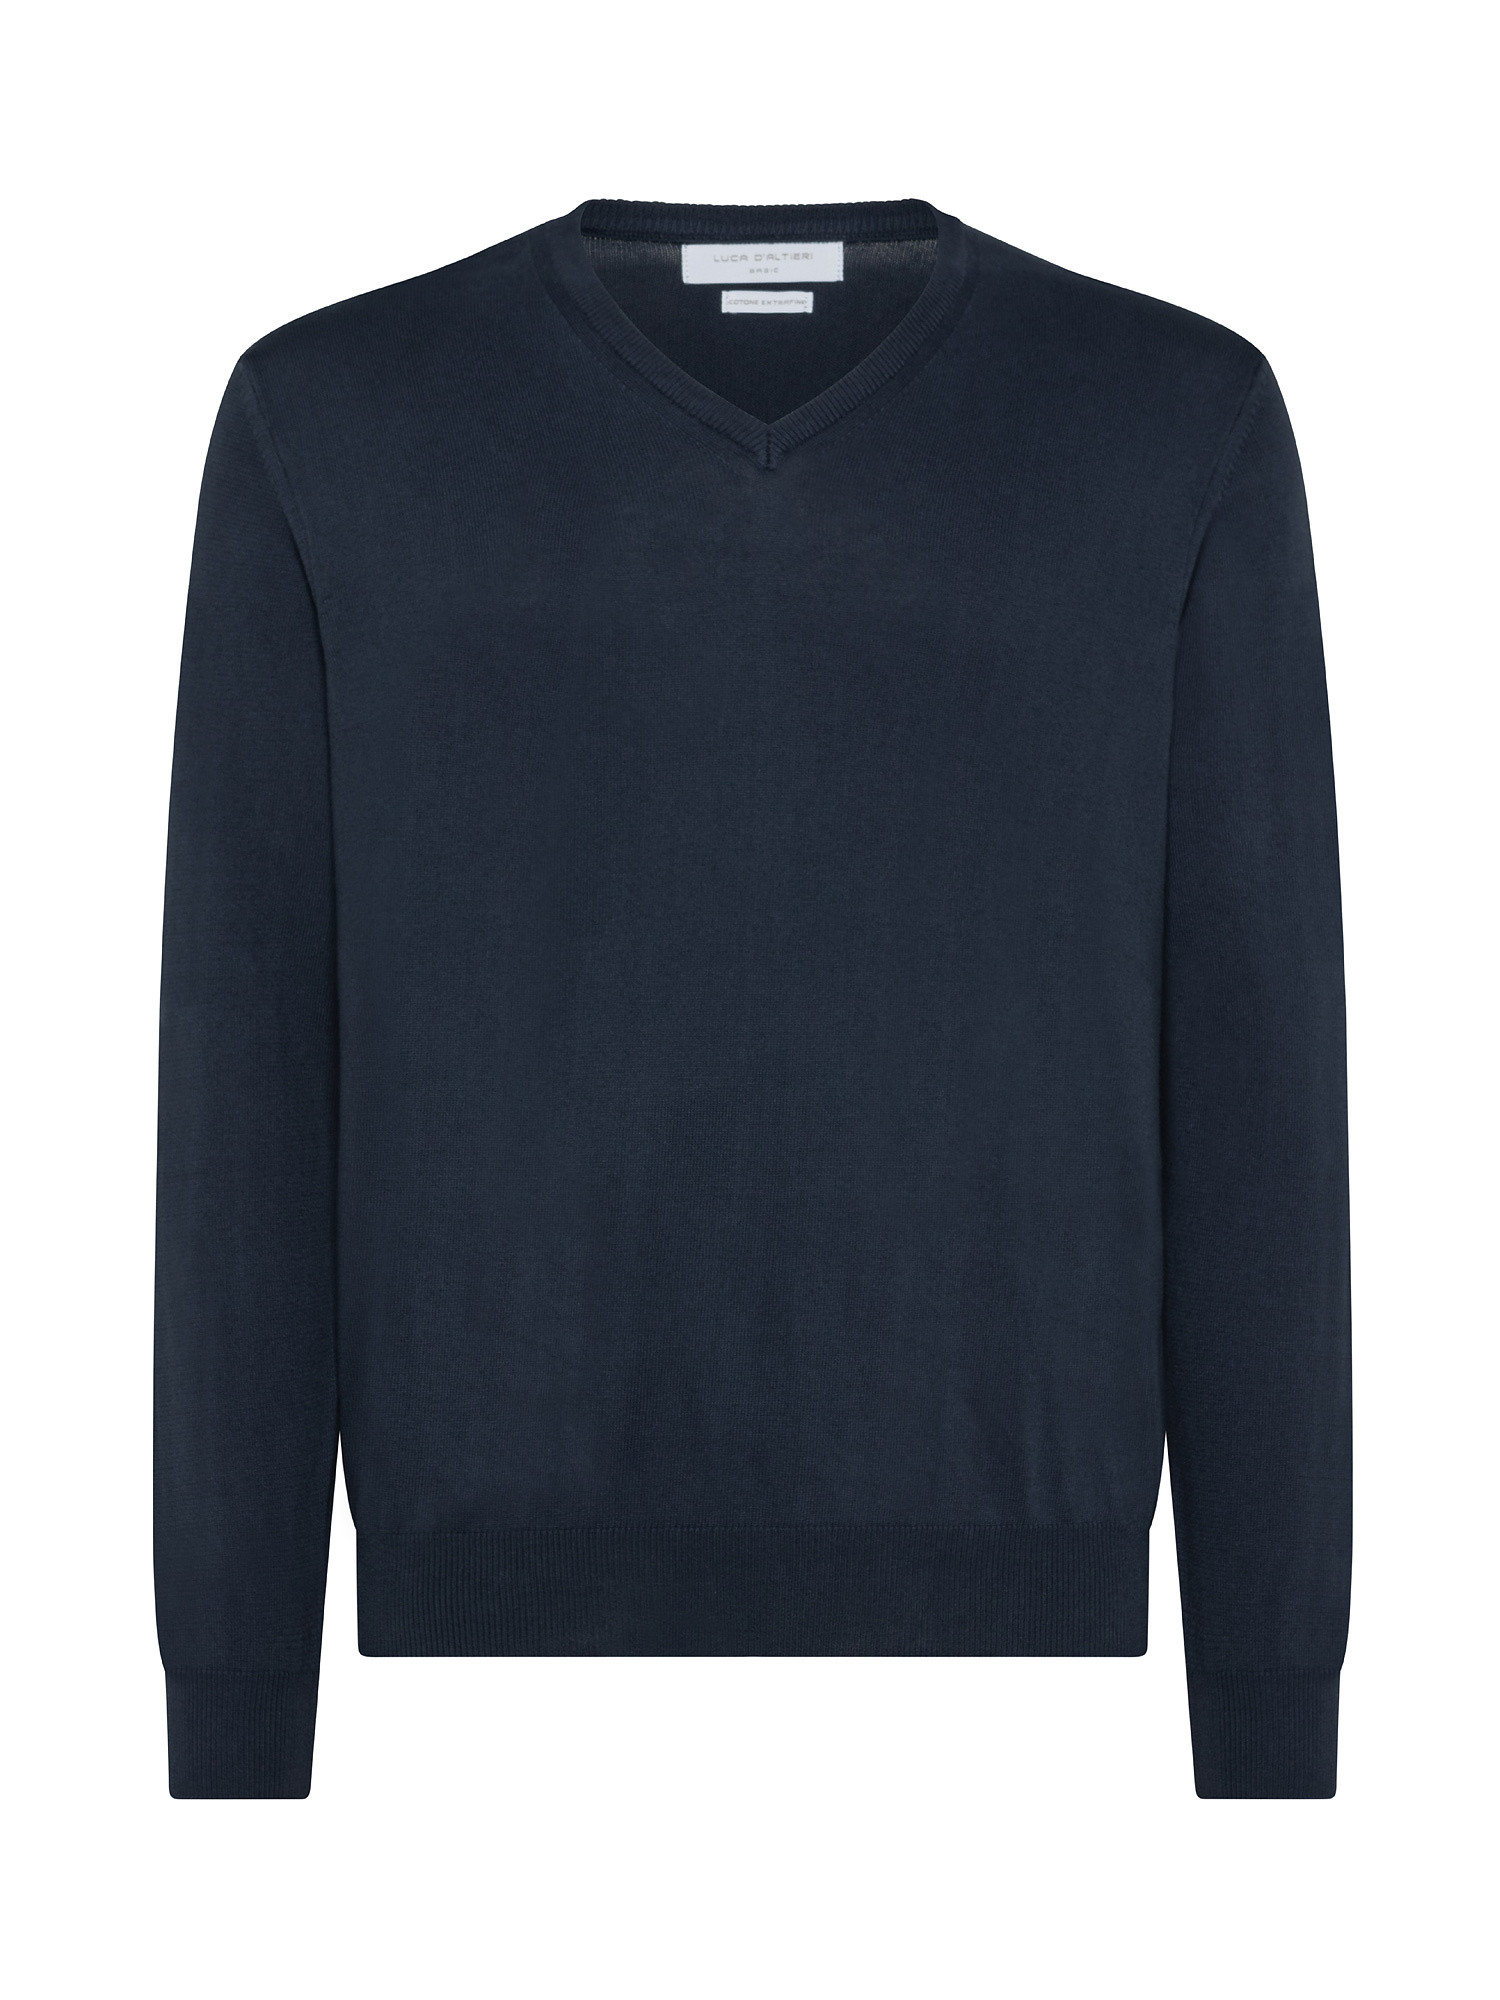 V-neck sweater in pure cotton, Dark Blue, large image number 0